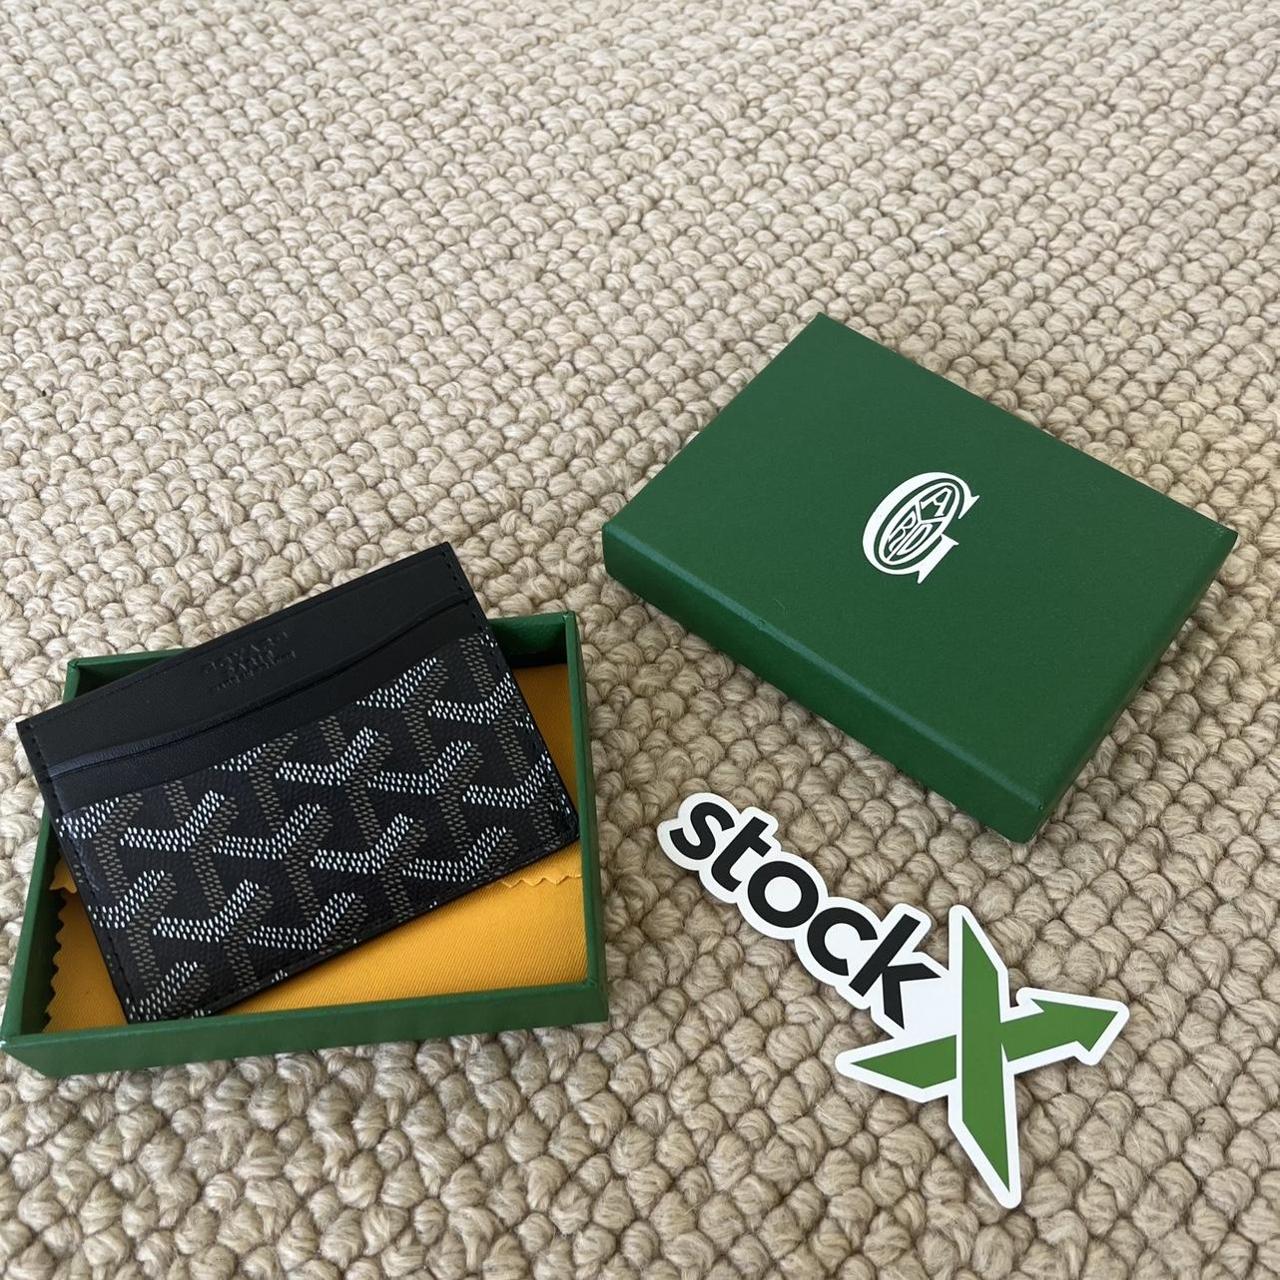 Goyard Cardholder - Black, Comes with box and all